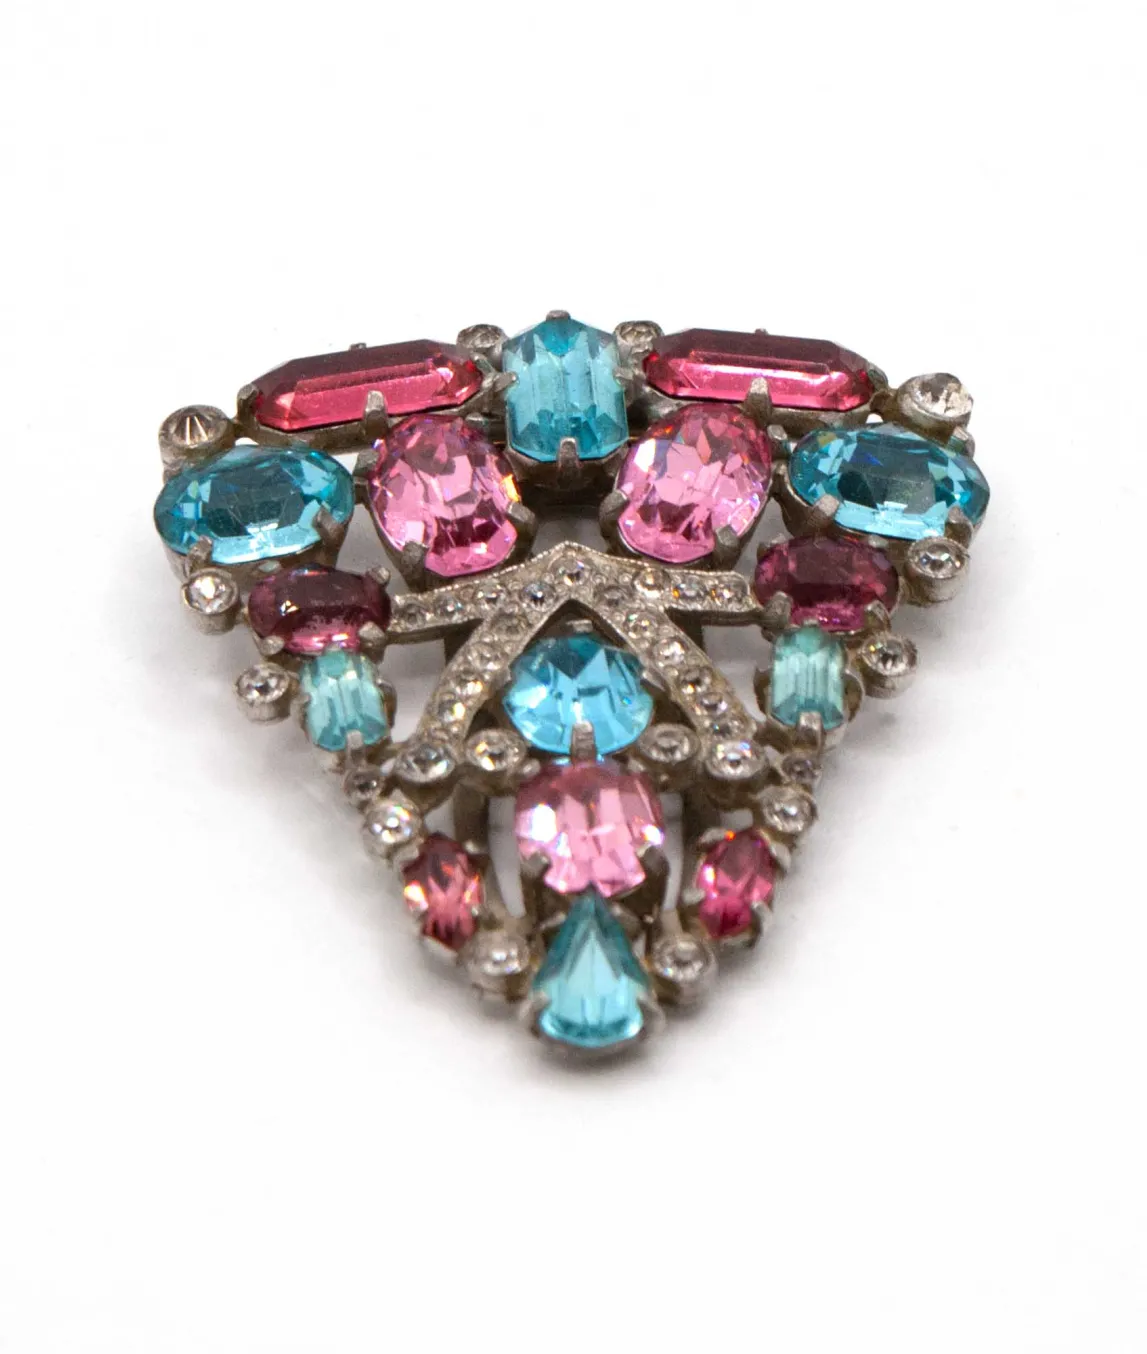 Large shield shaped fur clip by Eisenberg Original set with large pink and aqua paste gems and rhinestones